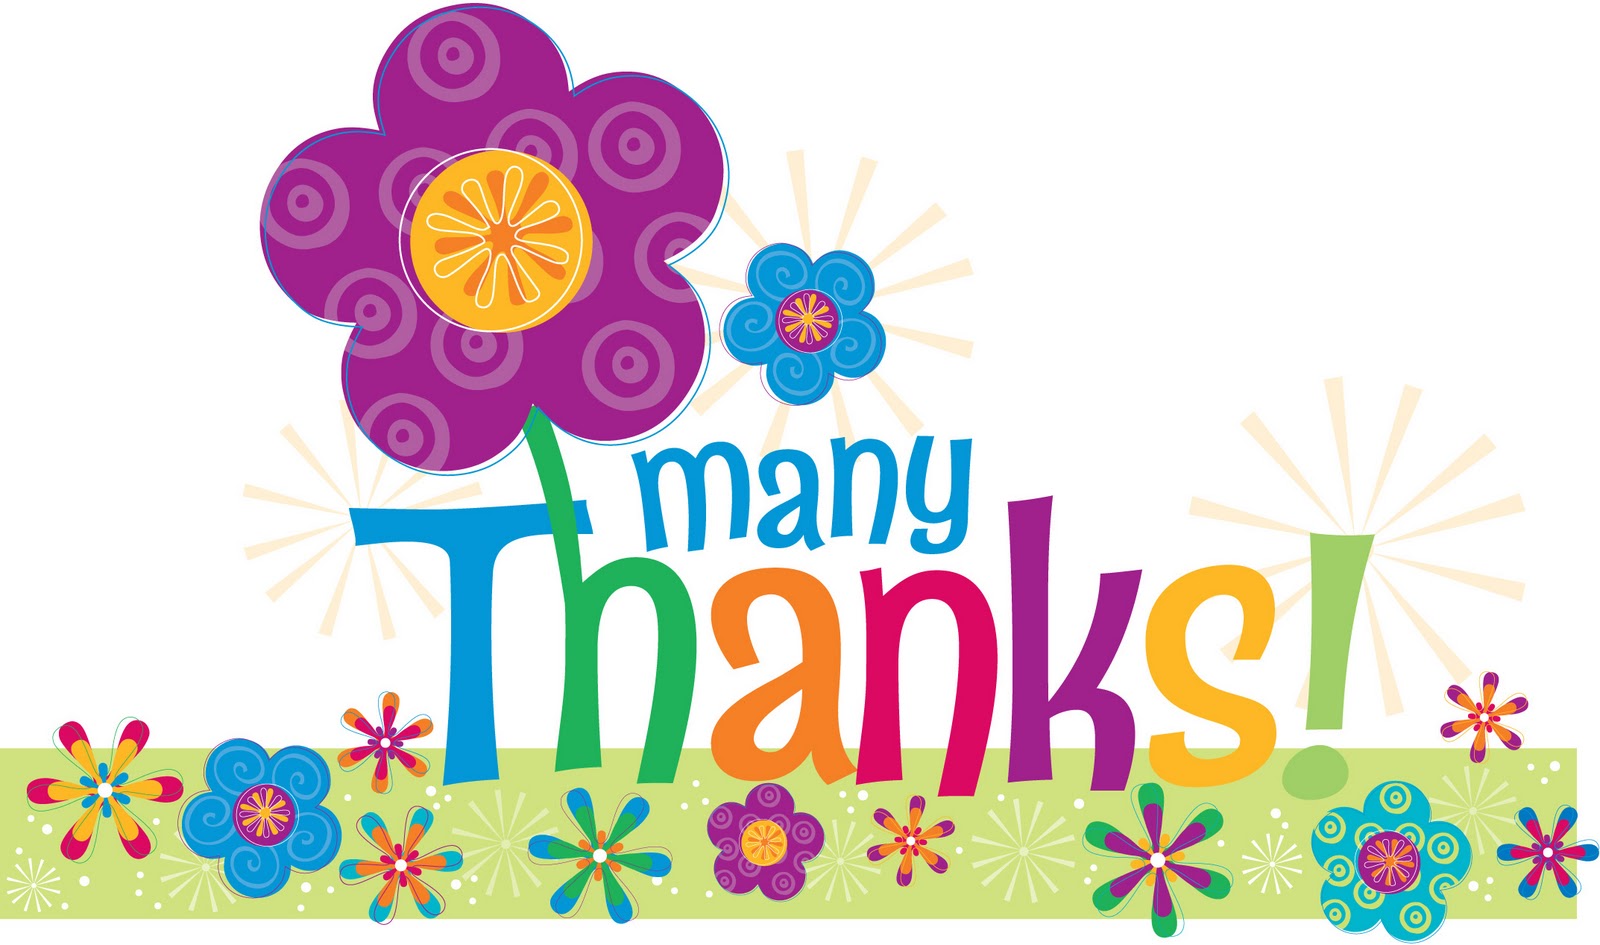 free animated clipart thank you - photo #19